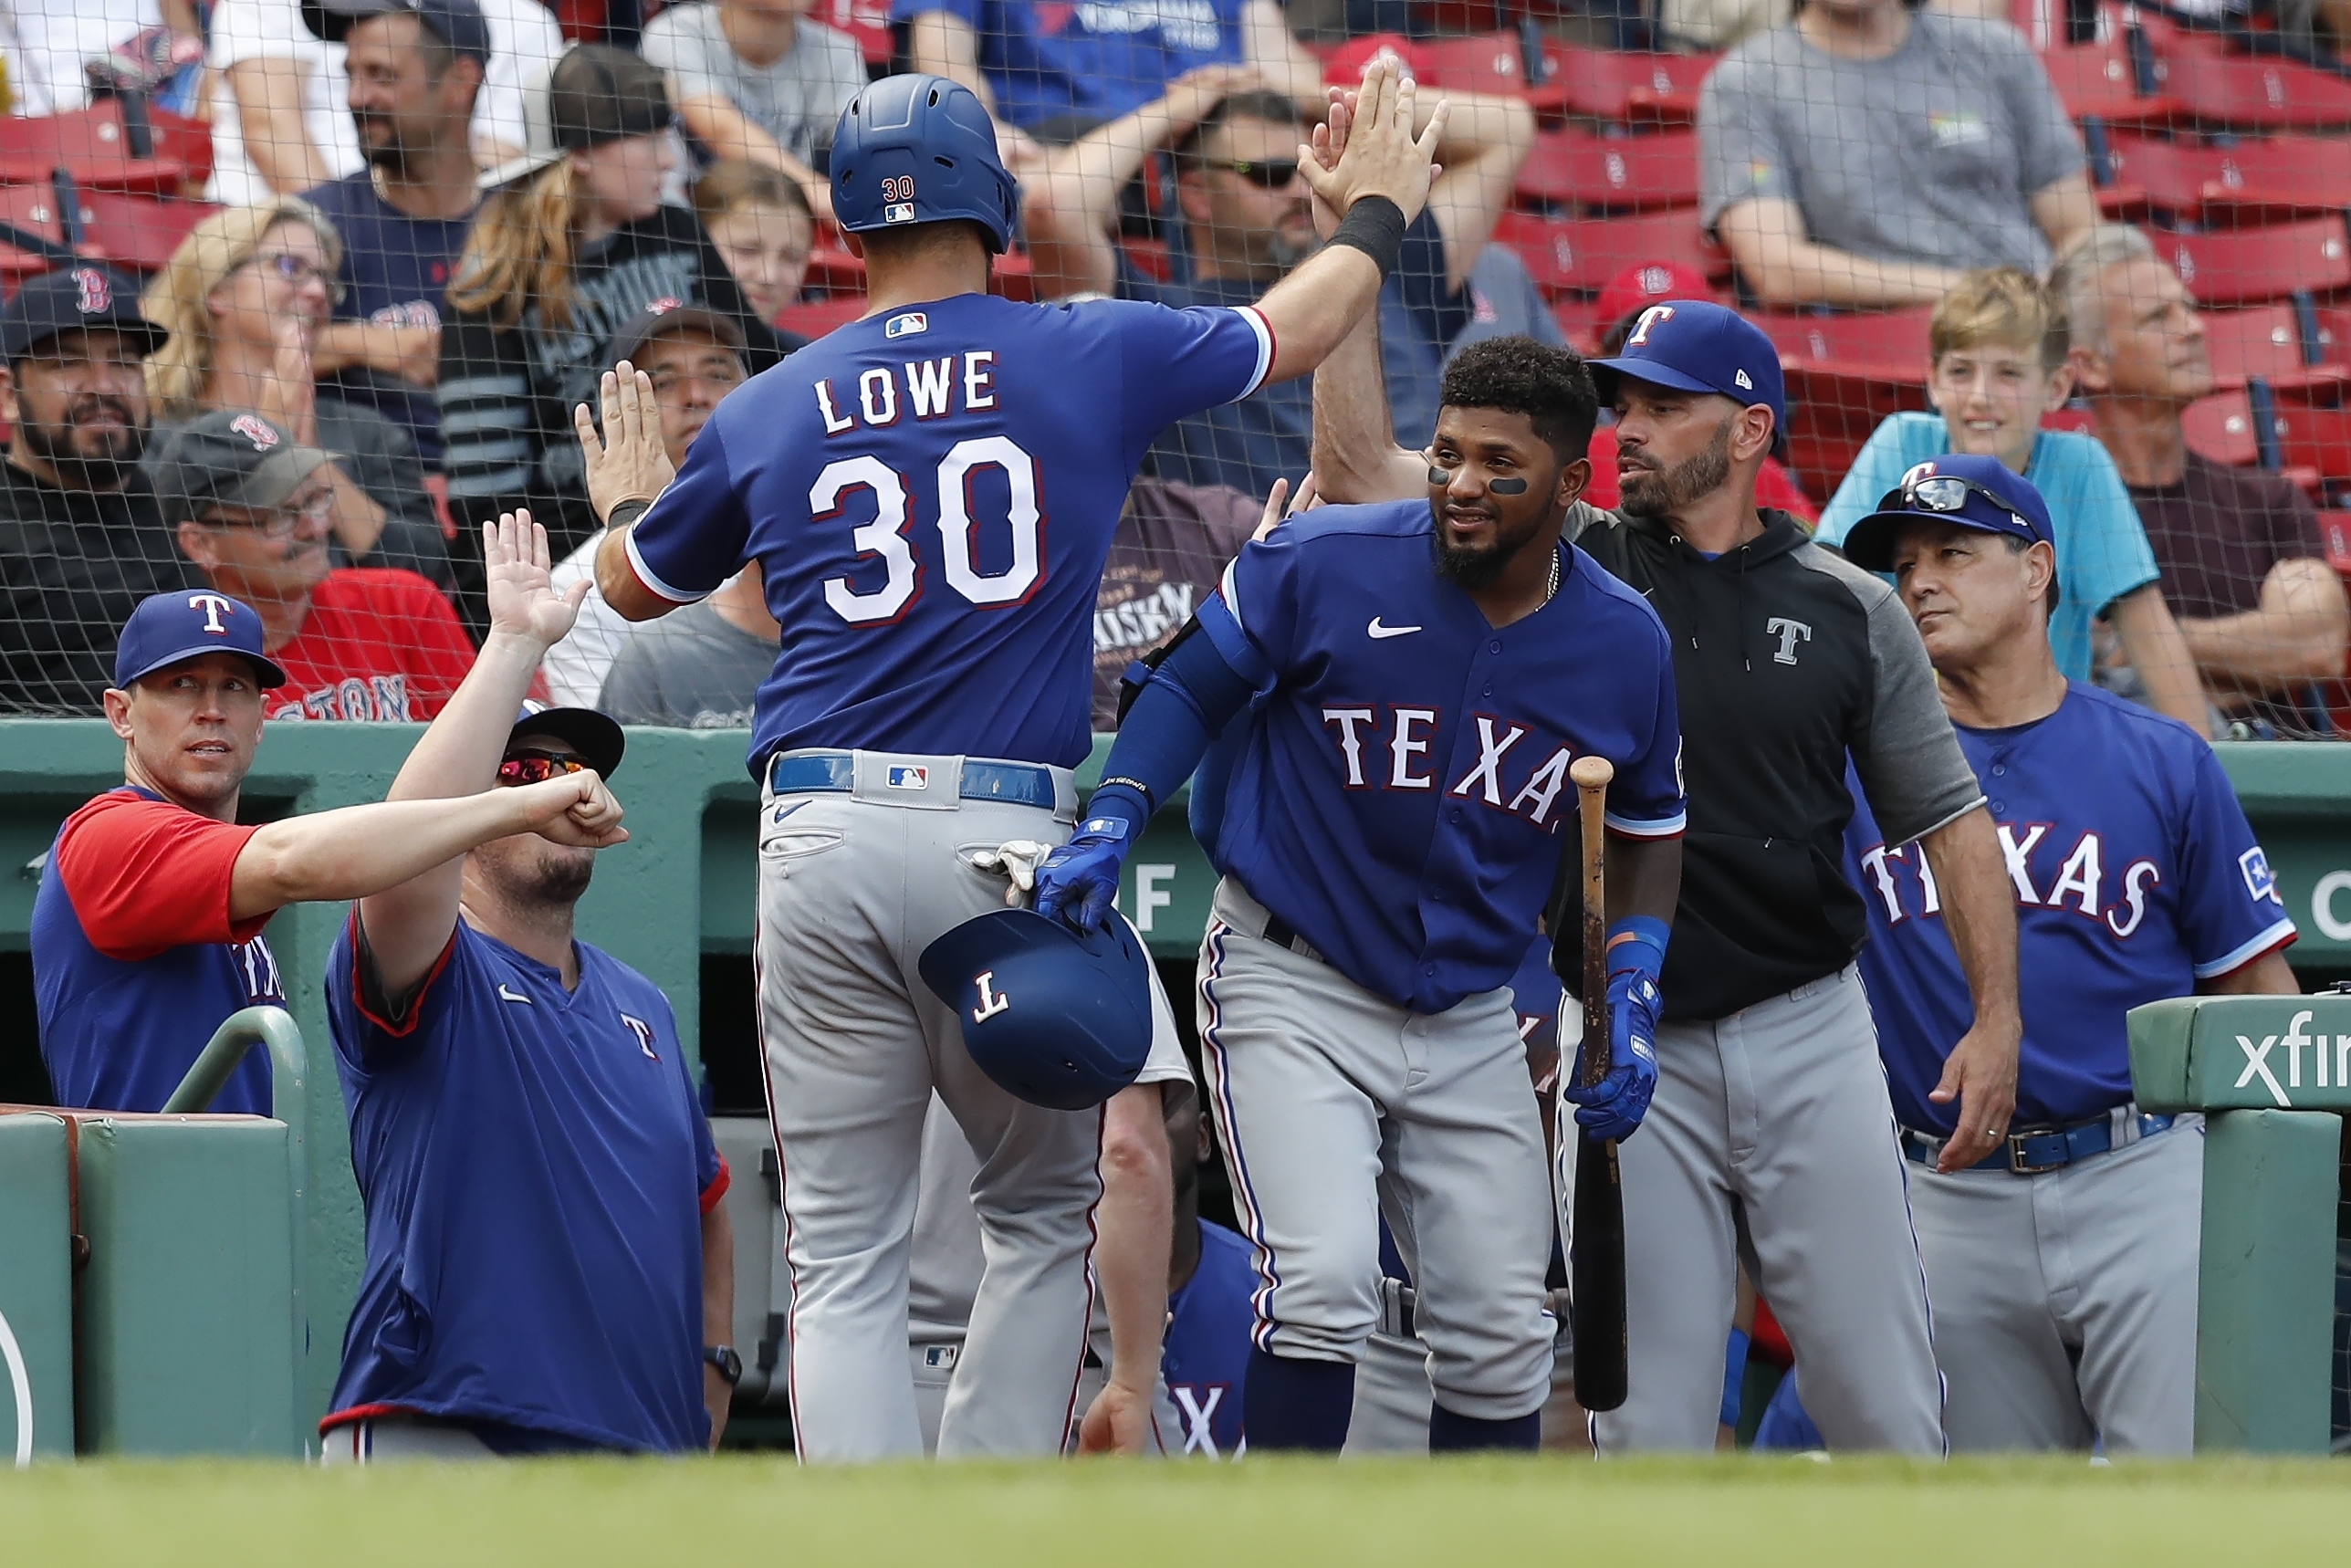 Eovaldi's 9th win leads Rangers to 8-4 victory